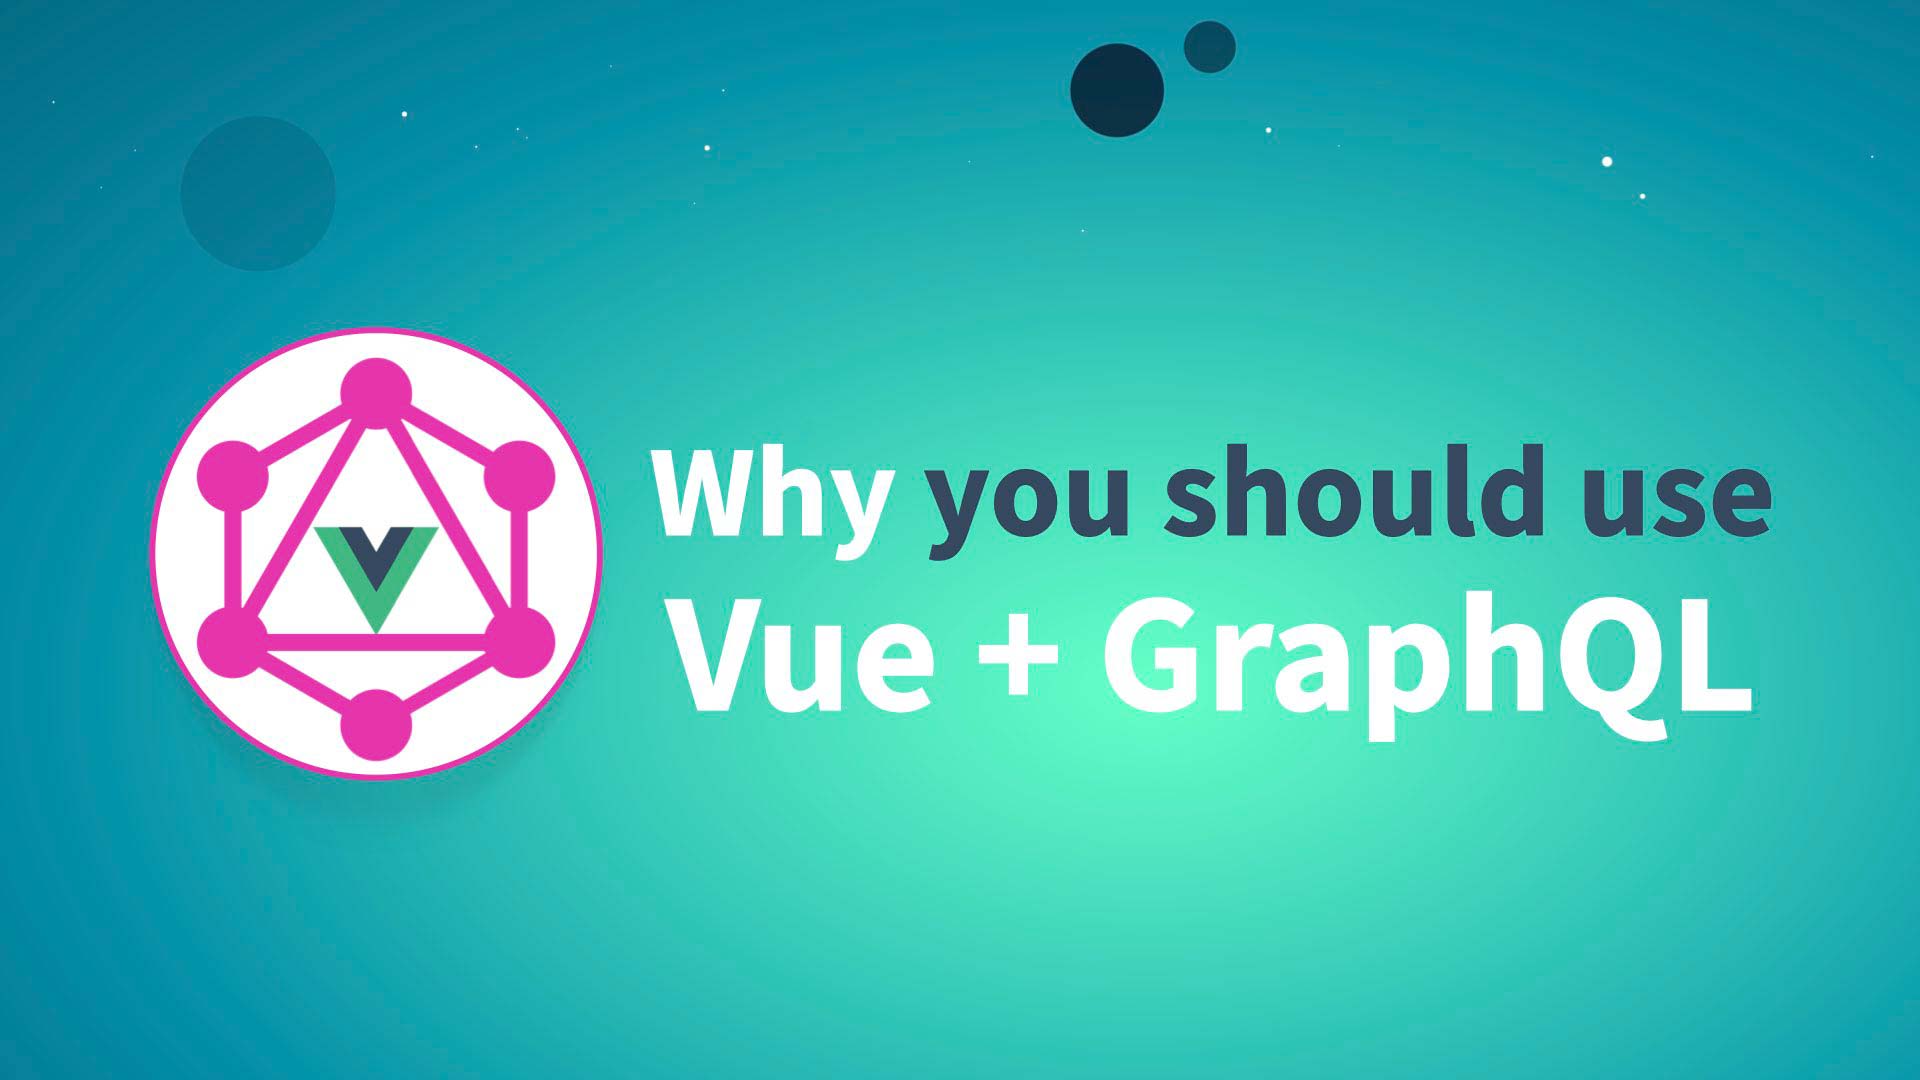 Part 1: Why you should use Vue + GraphQL